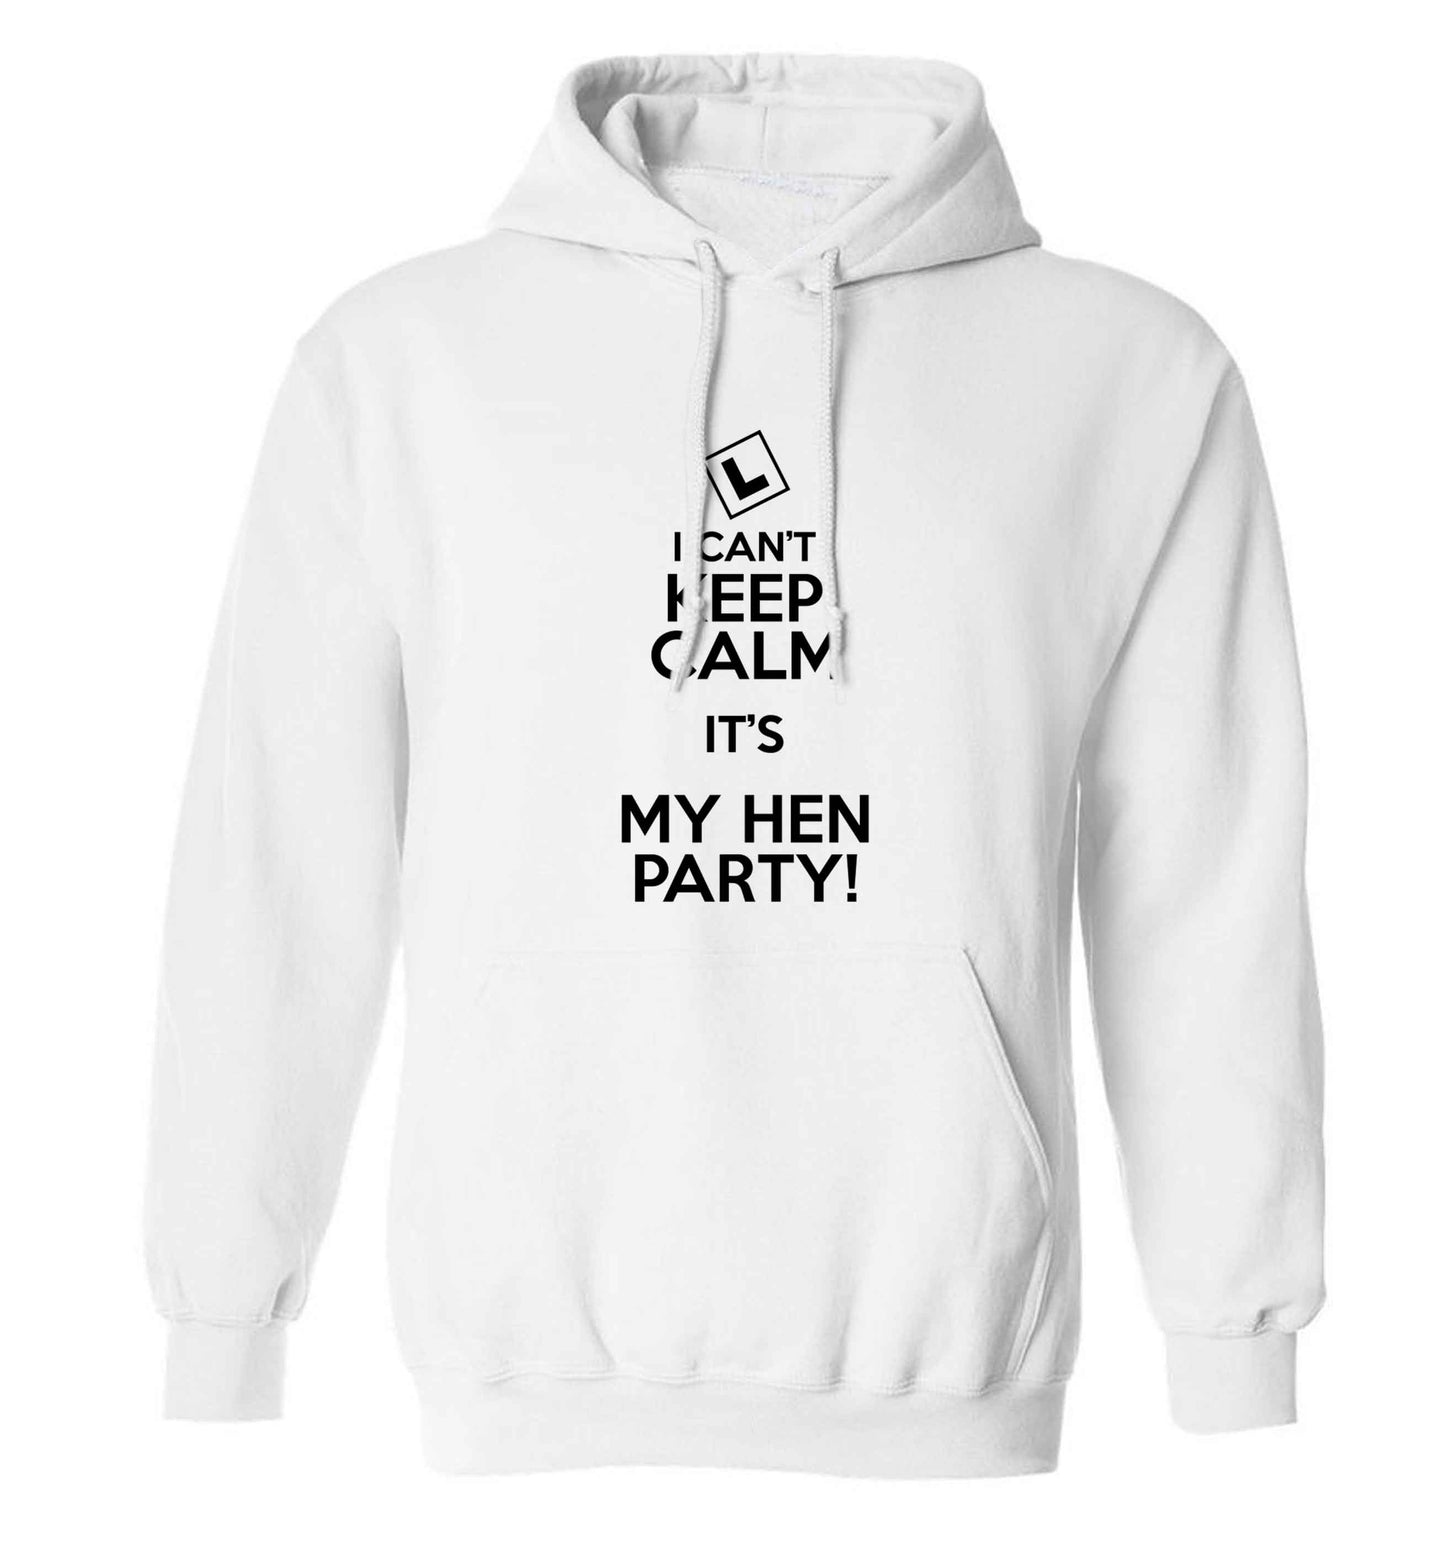 I can't keep calm it's my hen party adults unisex white hoodie 2XL